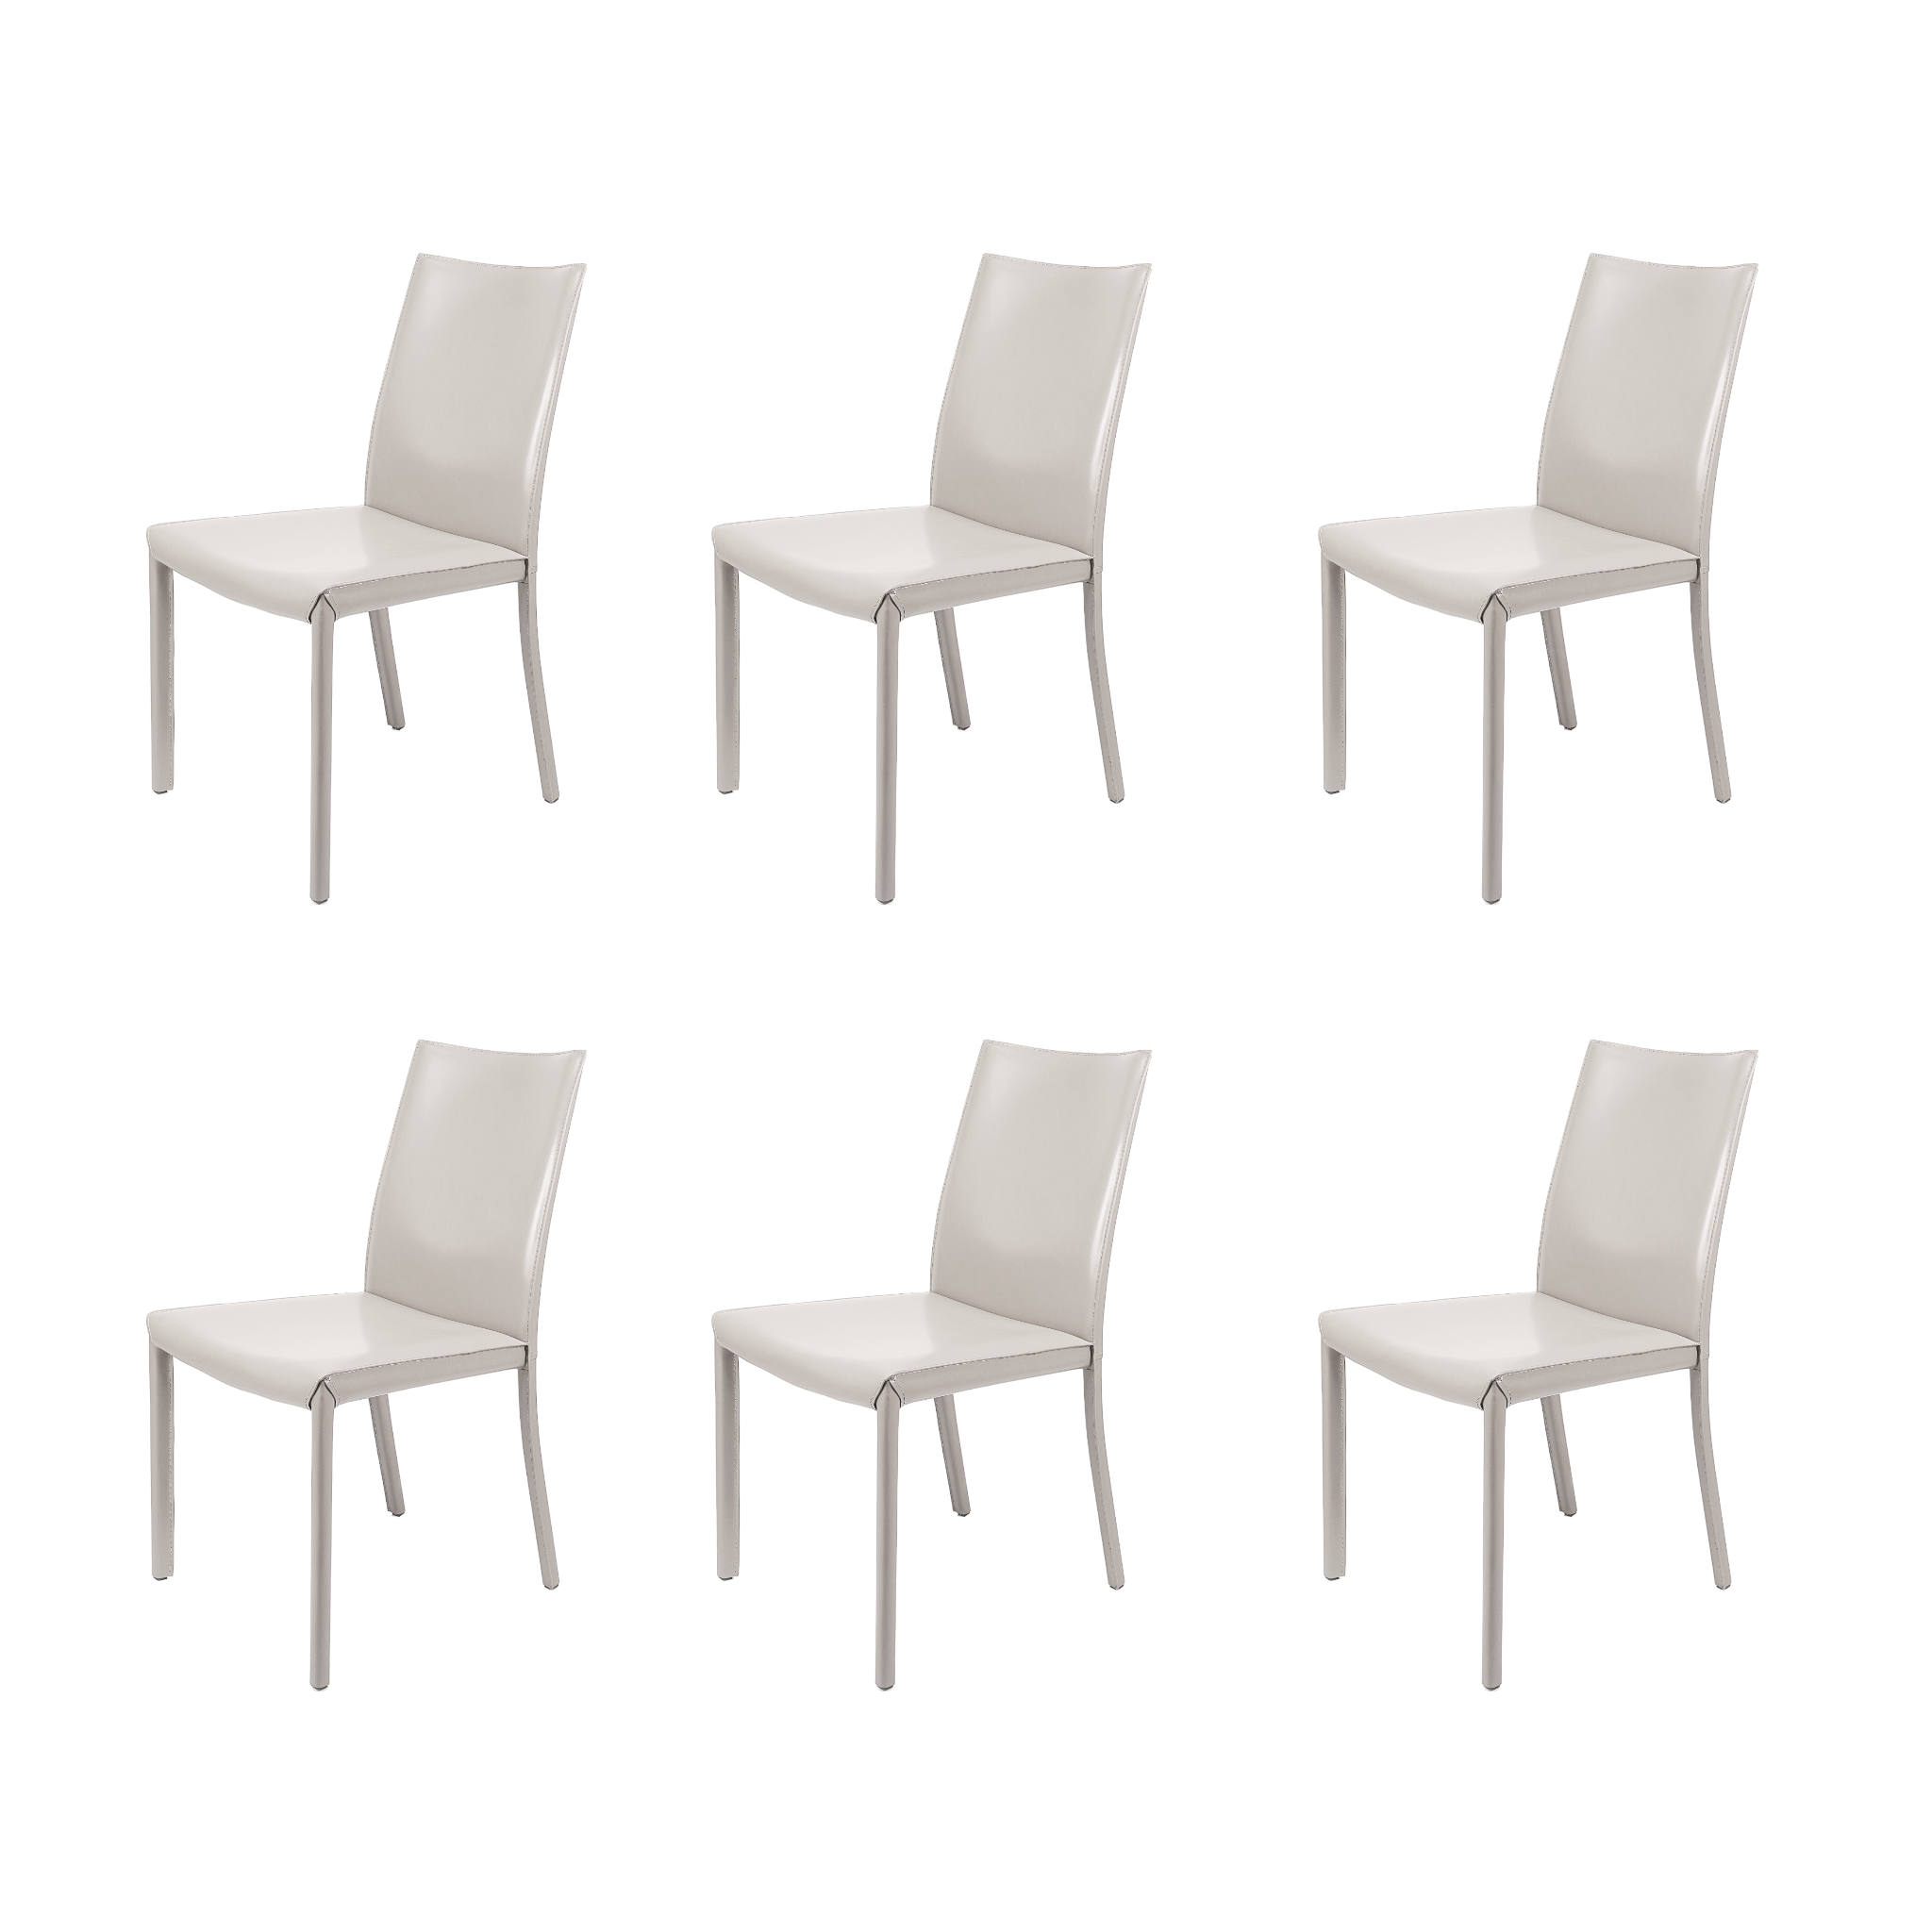 Emma Low Back Light Grey Dining Chair (sold as a set of 6)